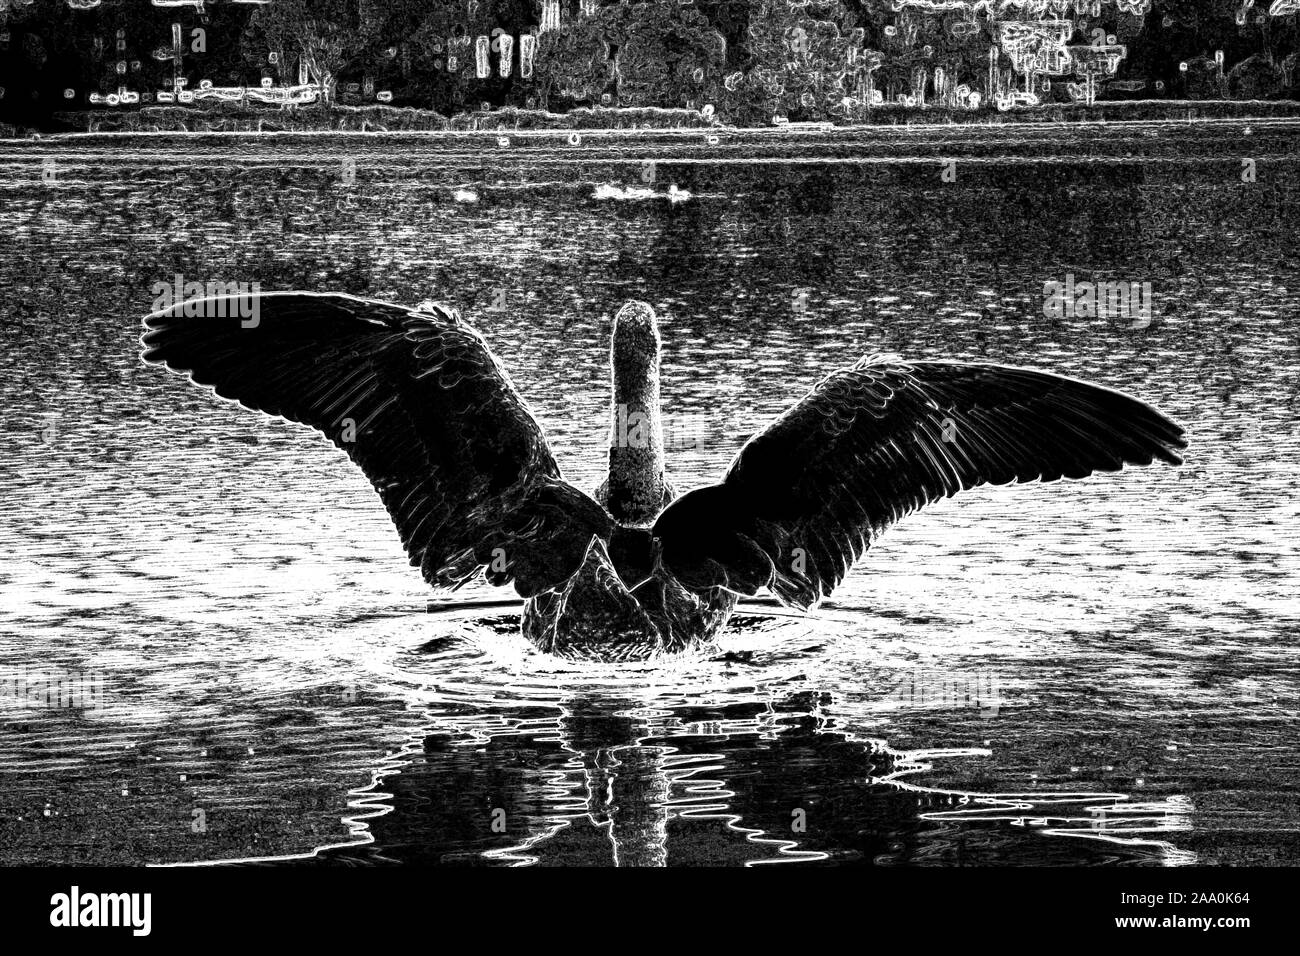 Black Swan spreading wings on waterfront of a lake. Digital art in black and white from original photo. Stock Photo